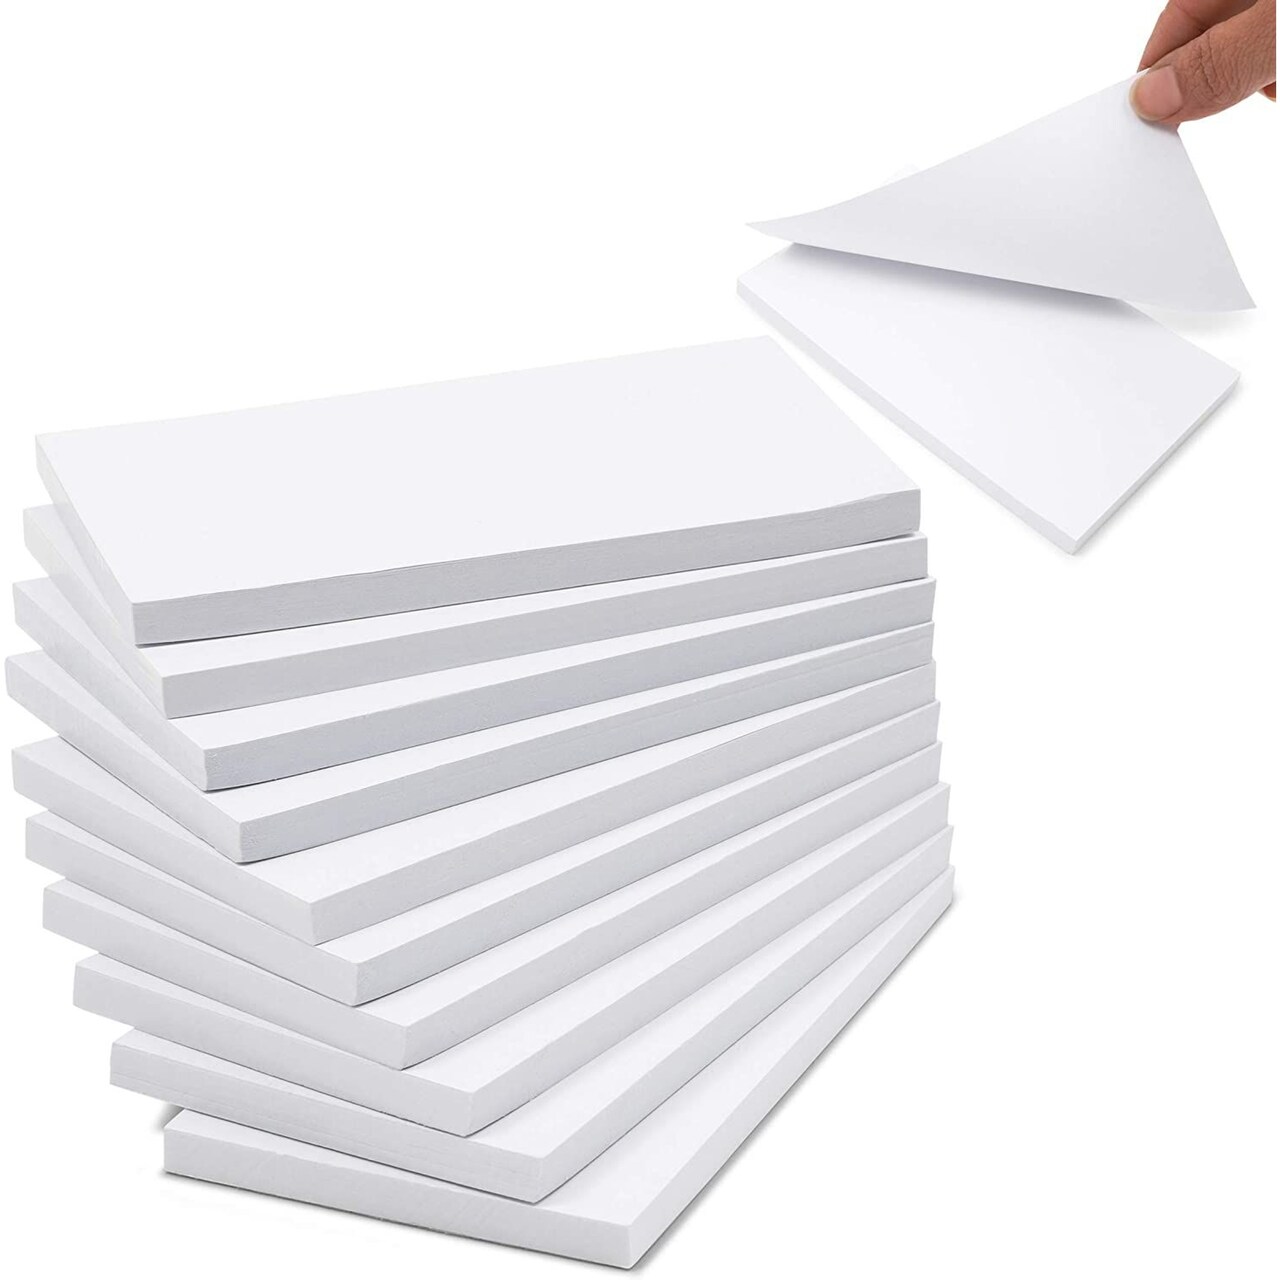 Plain Notepads, Blank Note Pads with 50 Sheets (3 x 5 Inches, 10 Pack)